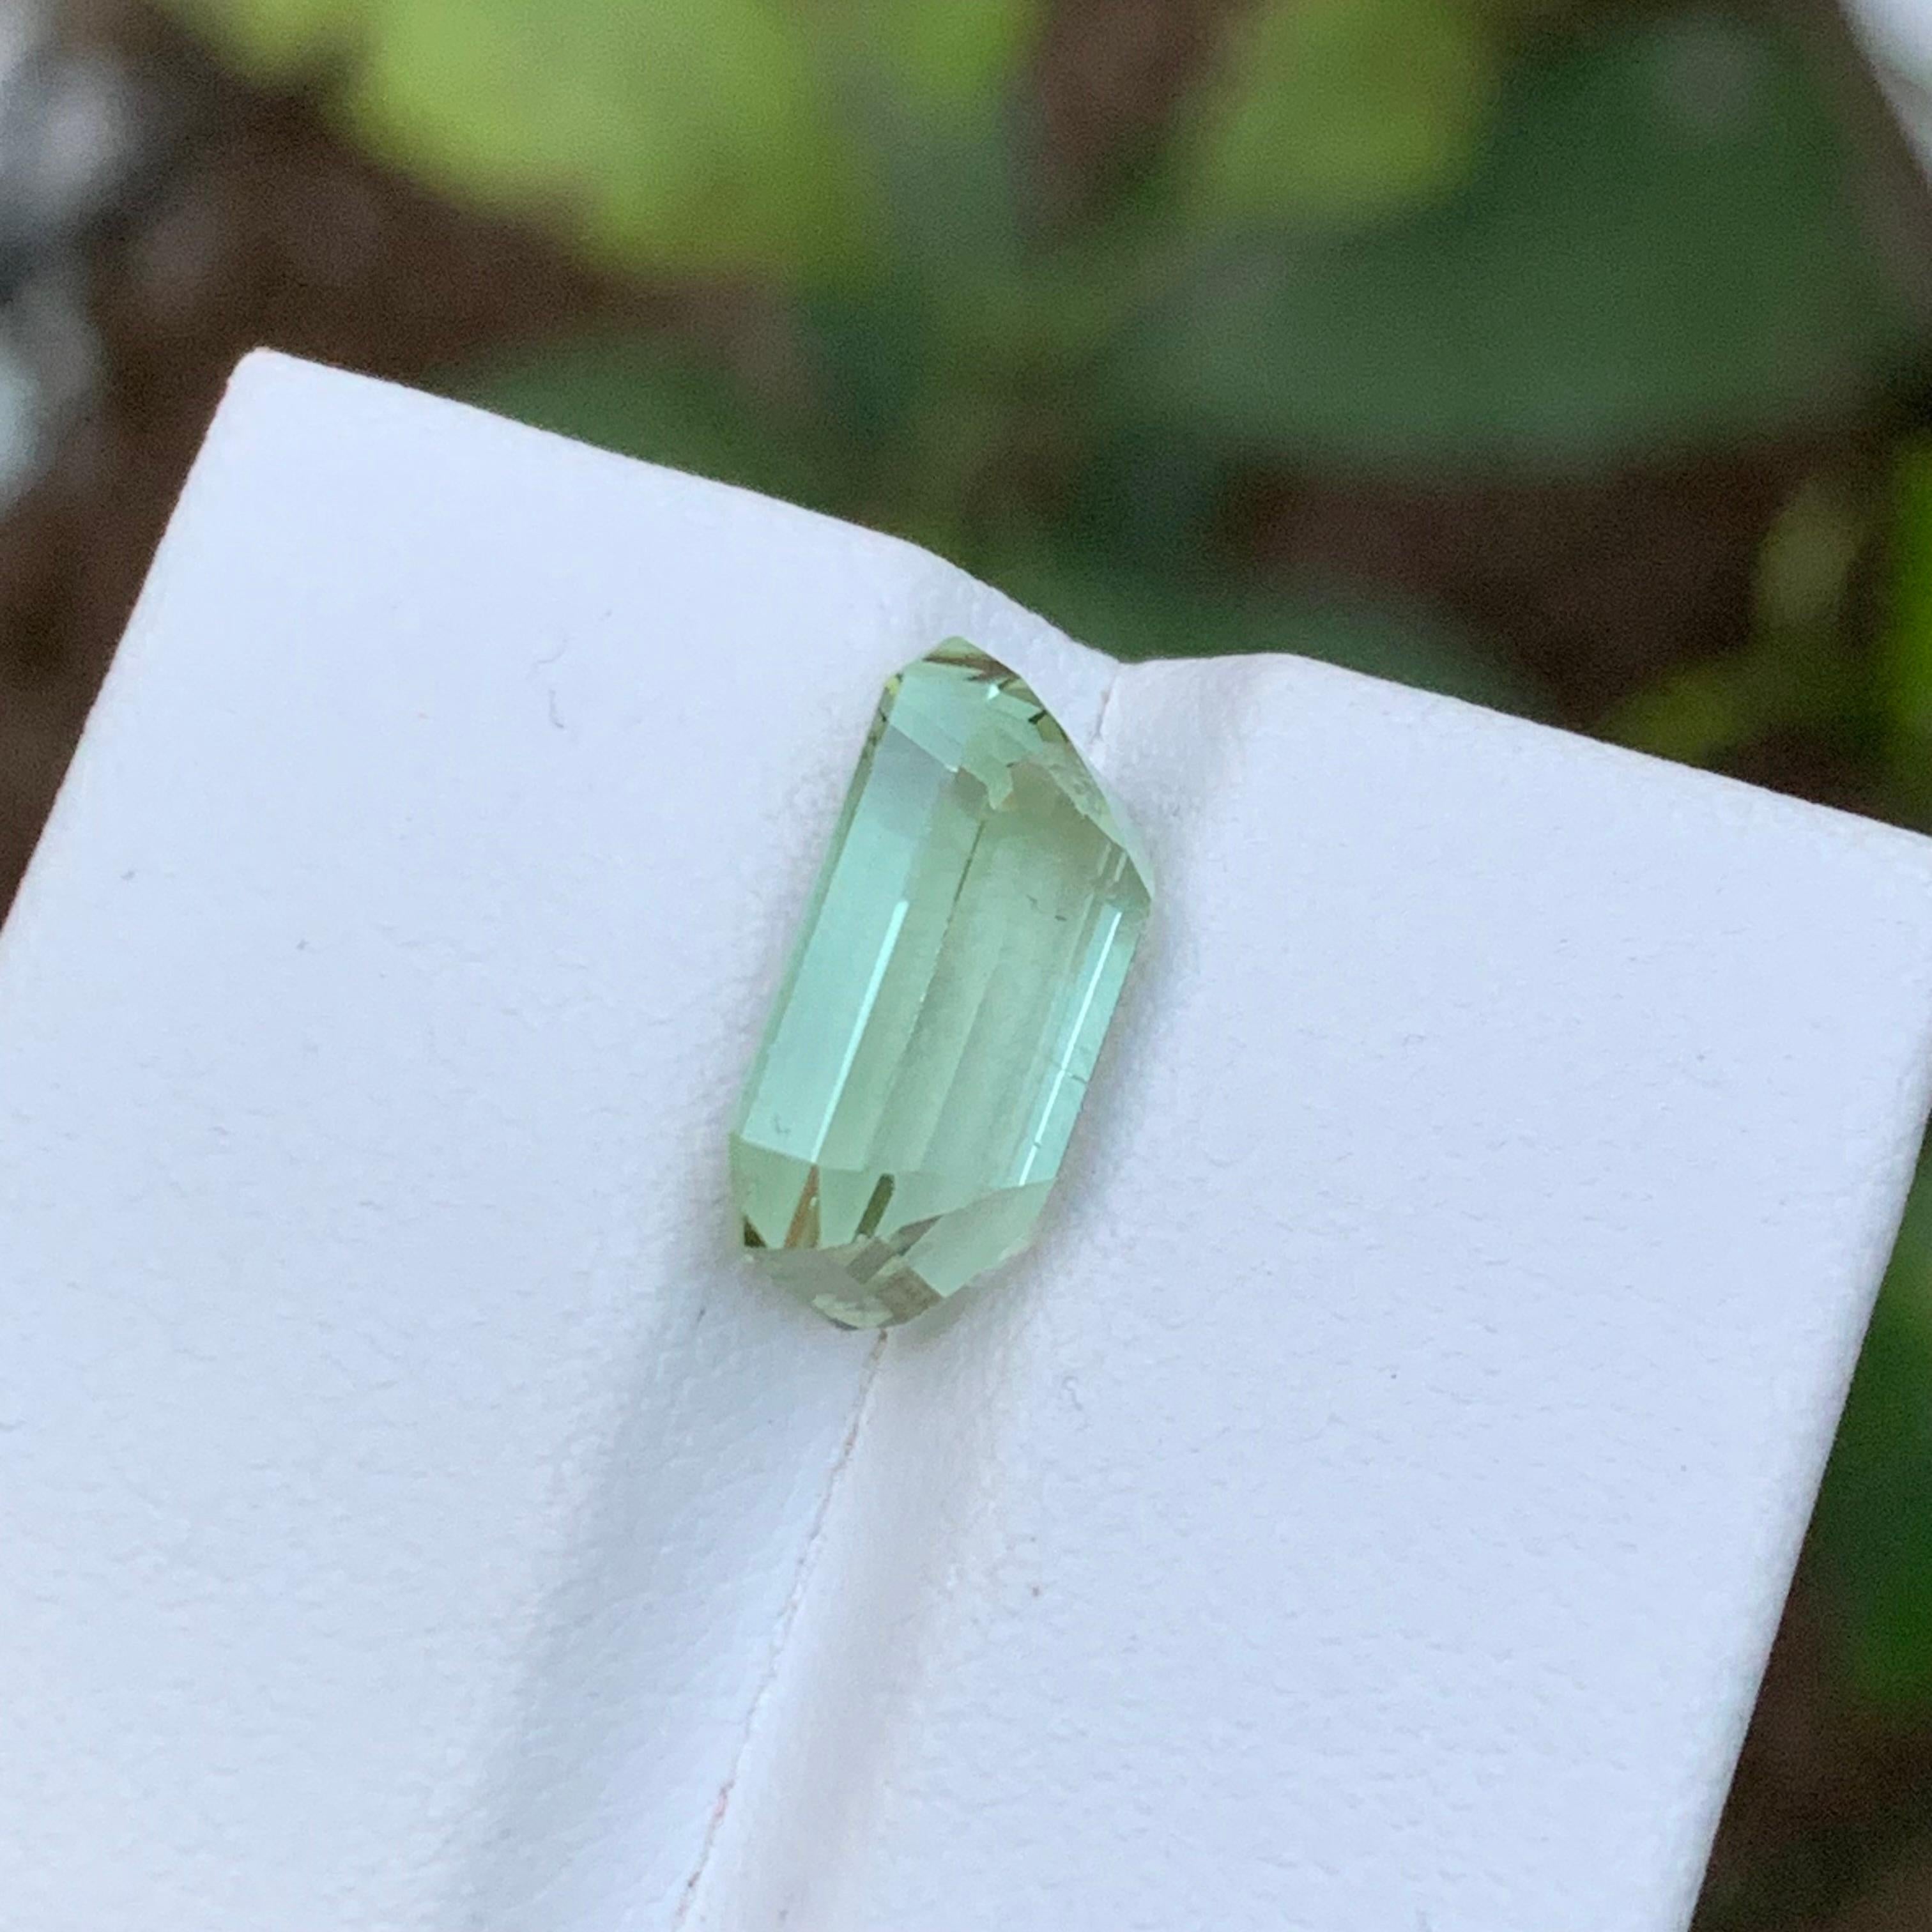 Rare Pastel Green Natural Tourmaline Gemstone, 5.05 Ct Emerald Cut-Ring/Jewelry For Sale 2